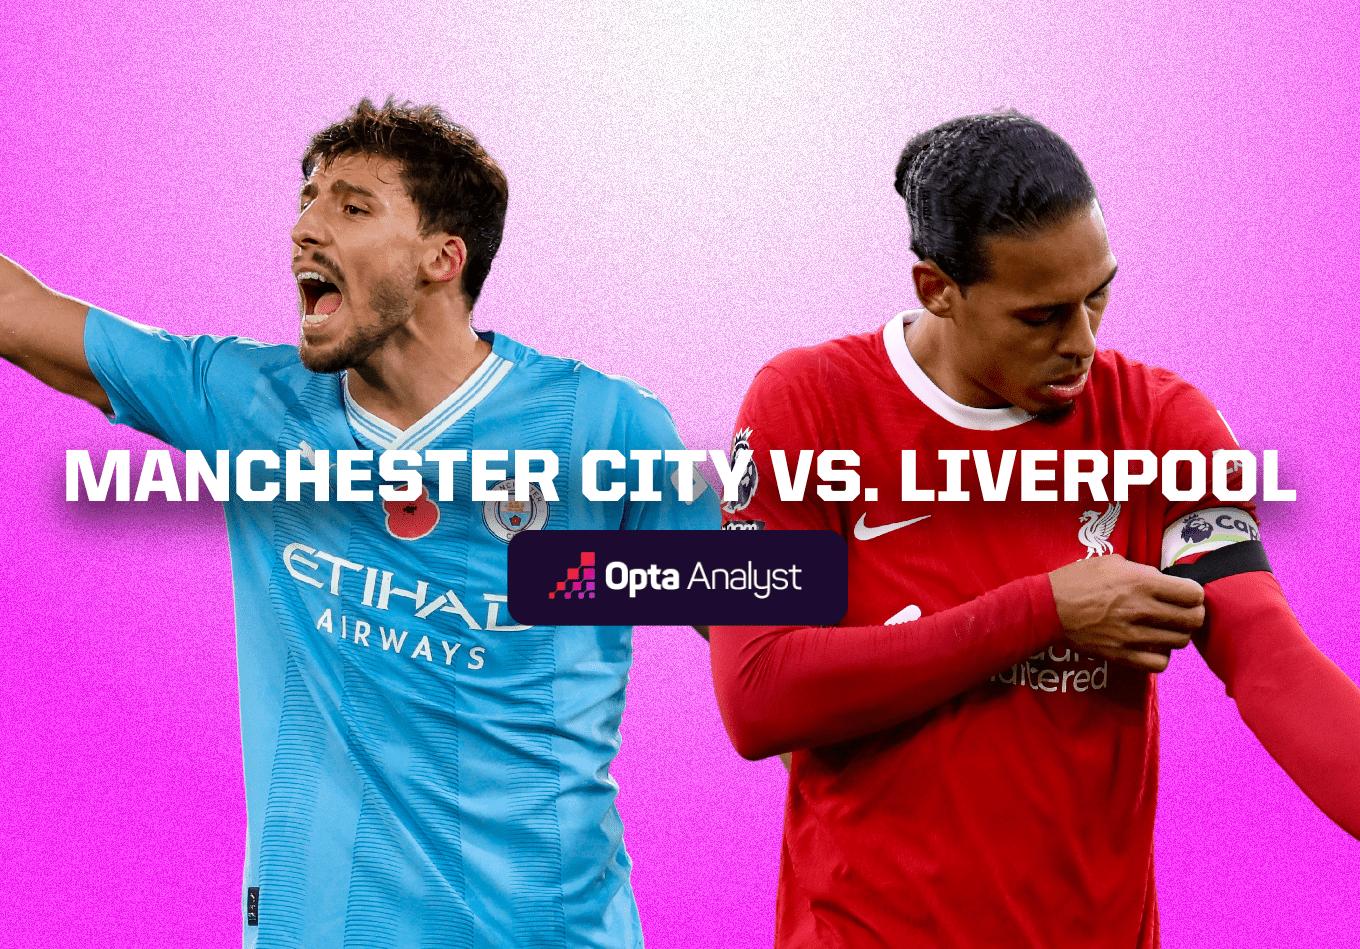 Manchester City vs Liverpool: Prediction and Preview